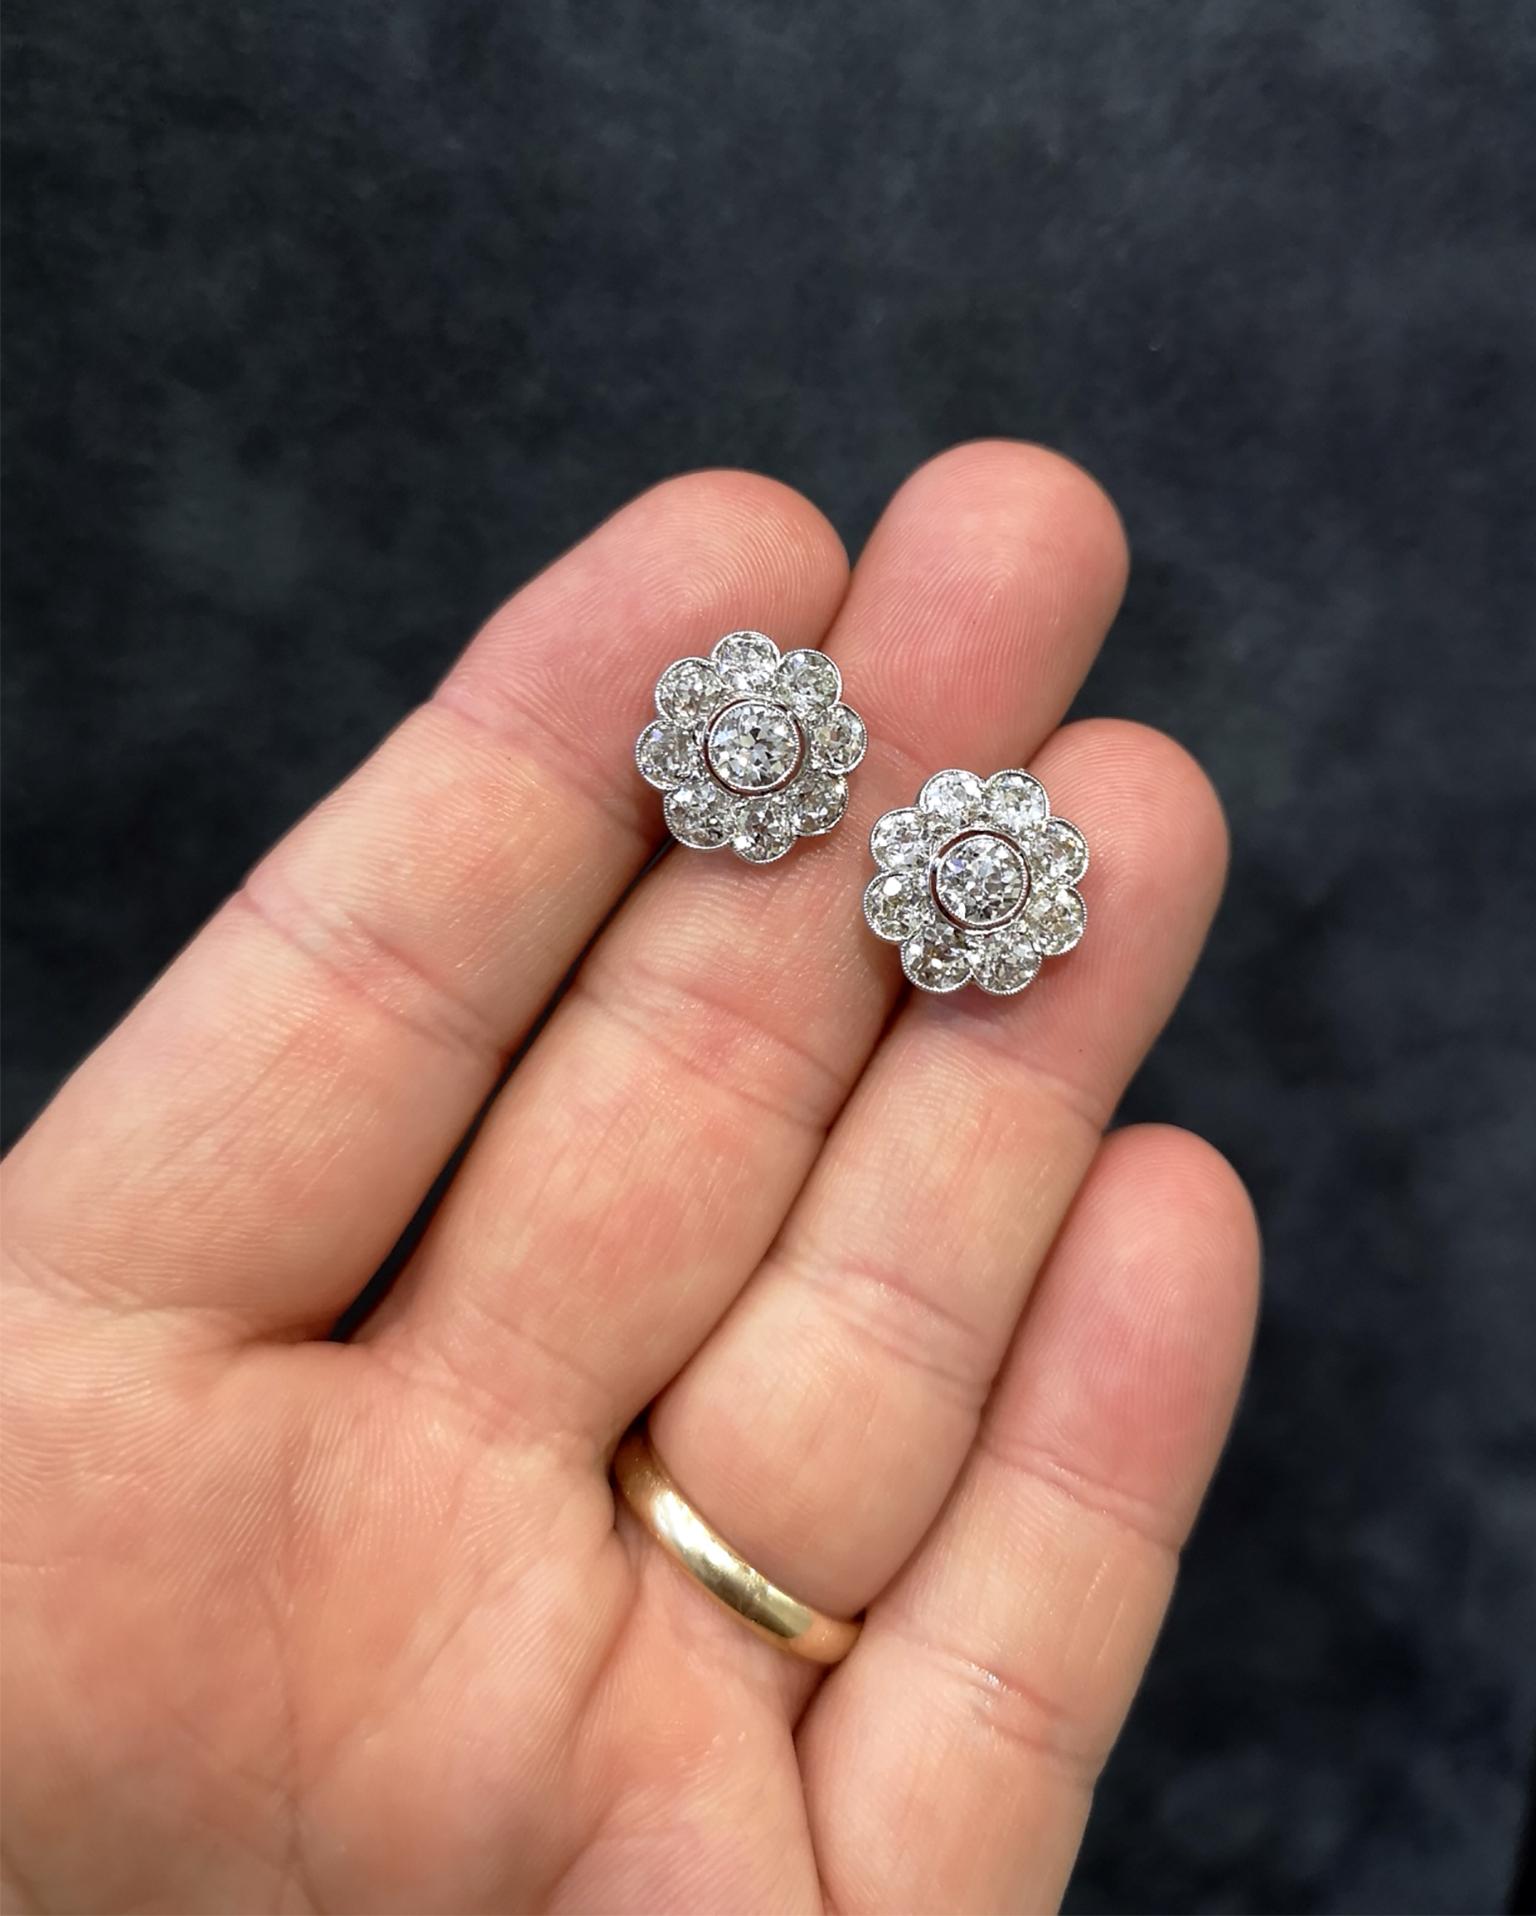 Exceptional Edwardian earrings in platinum. Sparkling old-cut diamonds mounted in bezel settings with exquisite millegrain detailing. Hook style fittings. Approximately 5.00 carats in total, H-I colour and SI clarity. 6g. 15mm x 15mm x 5mm.